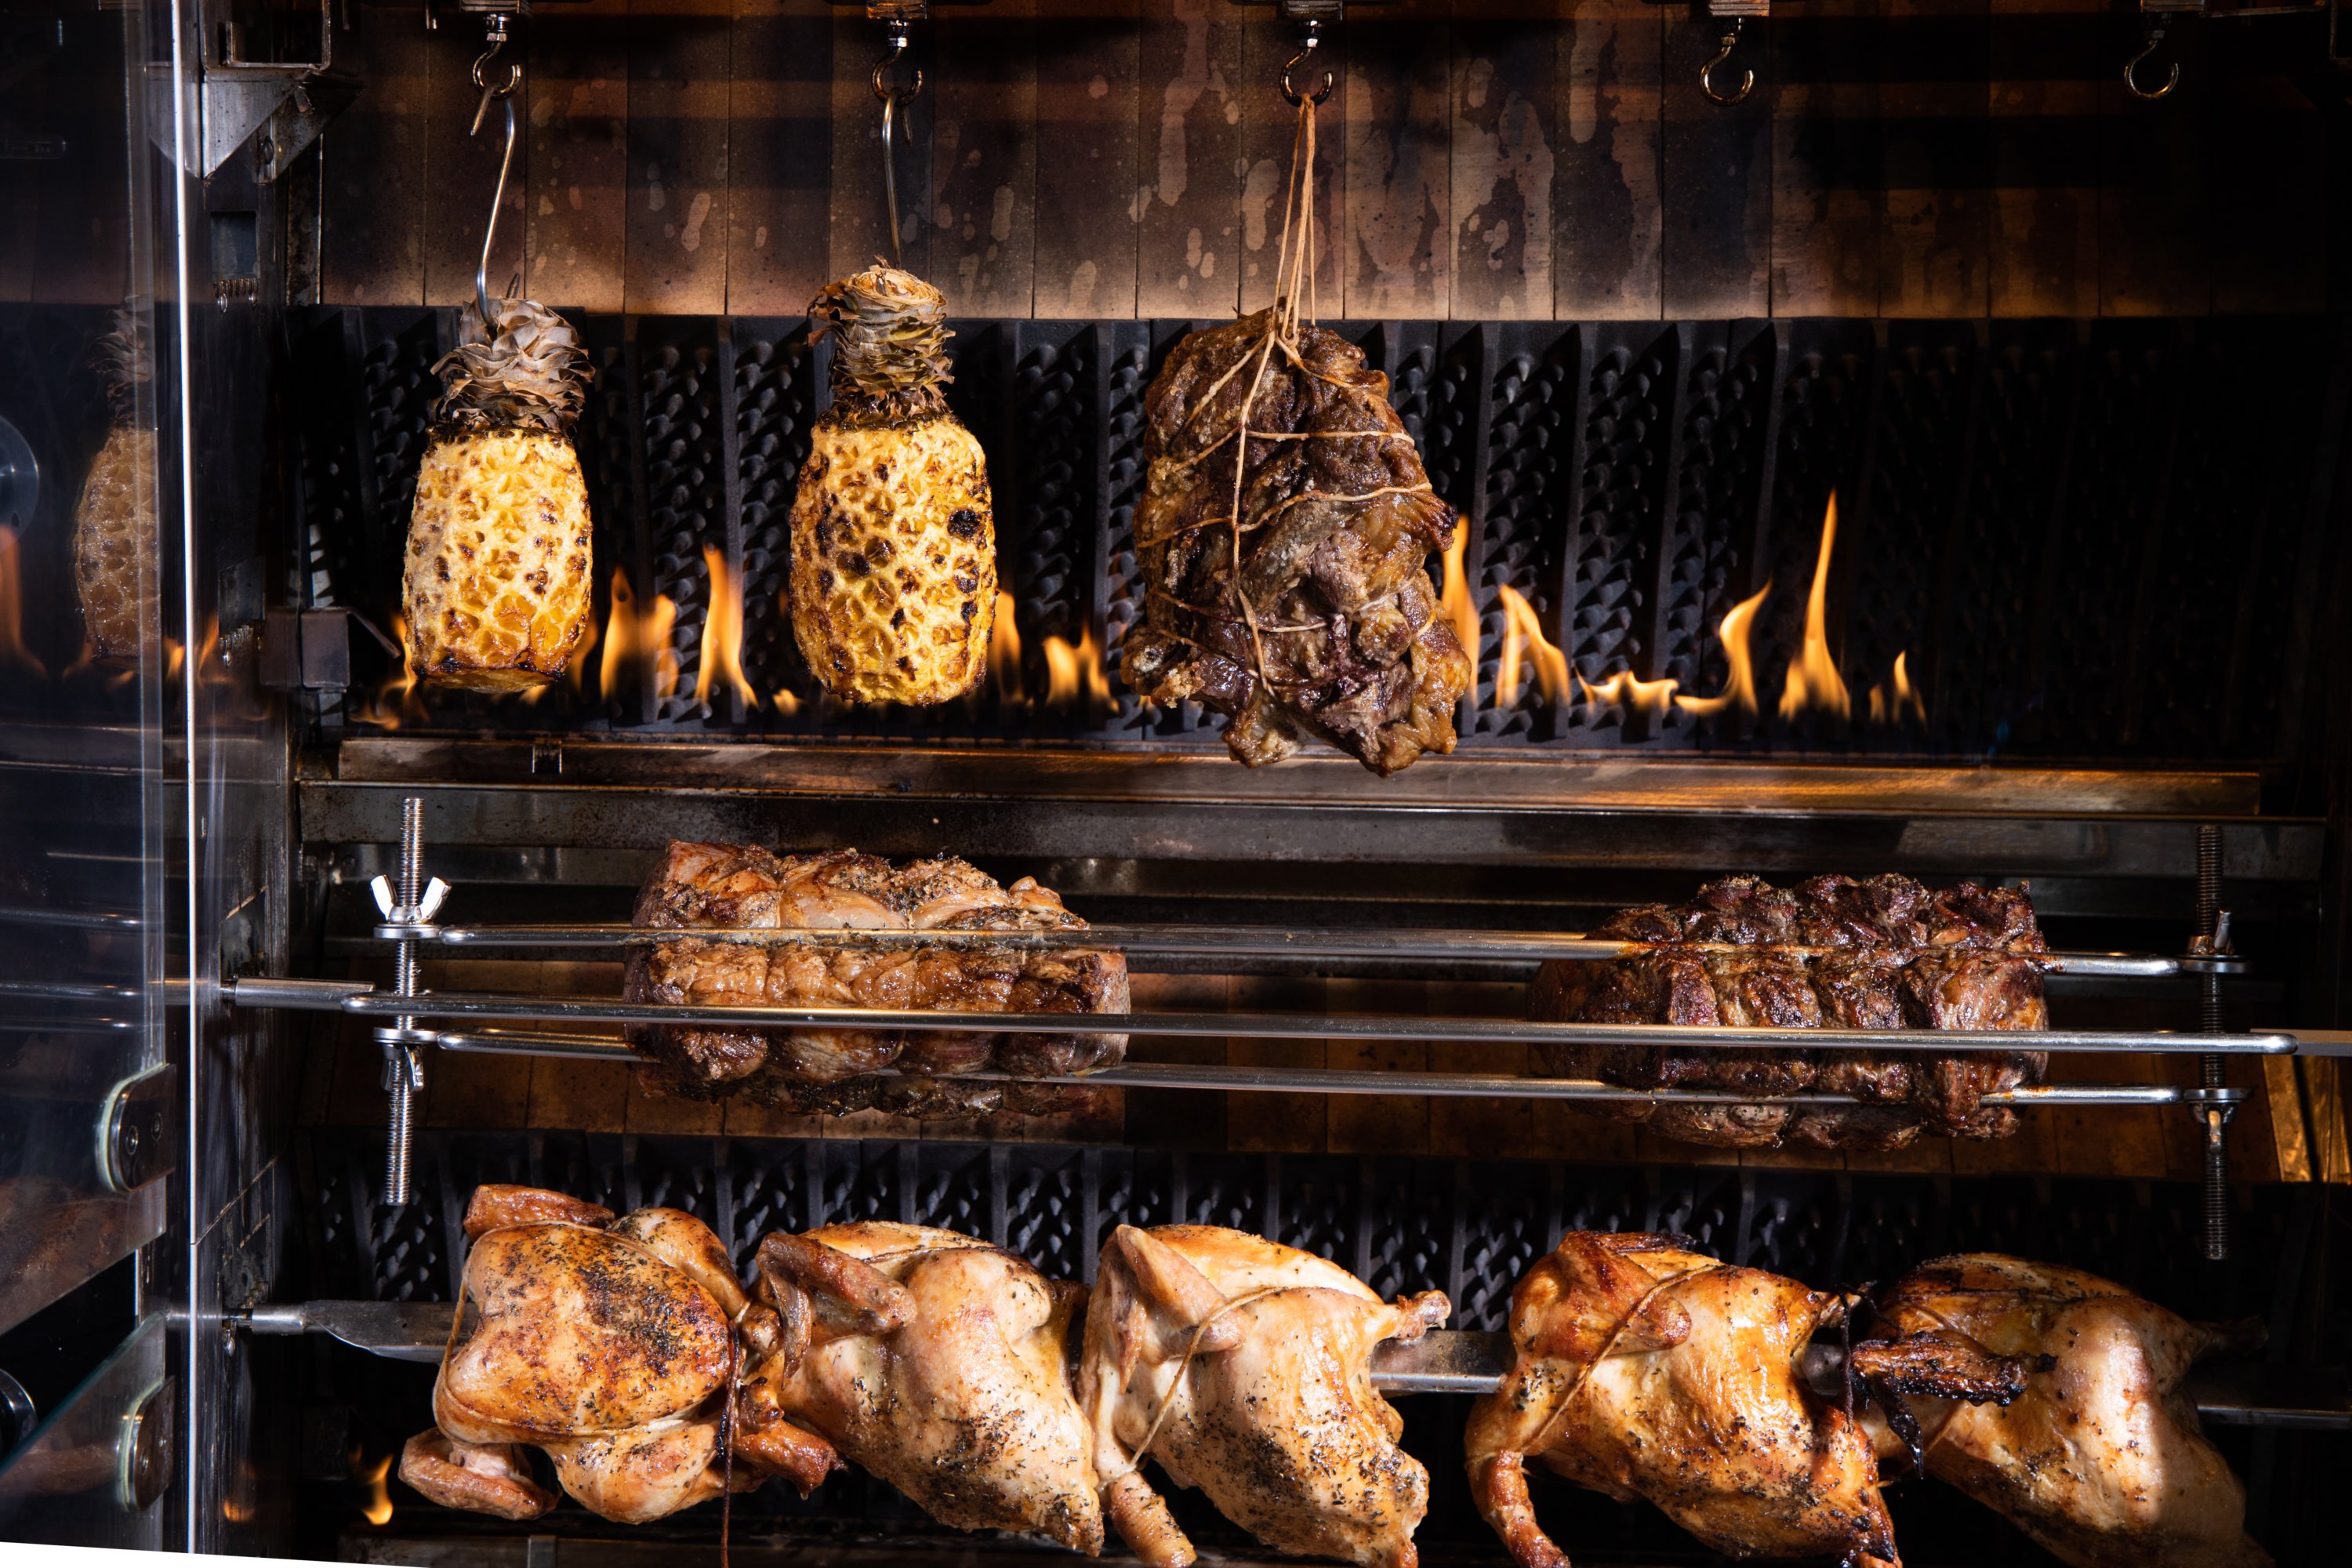 Daily specials make use of the French rotisserie oven. Photo by Jennifer Chase.